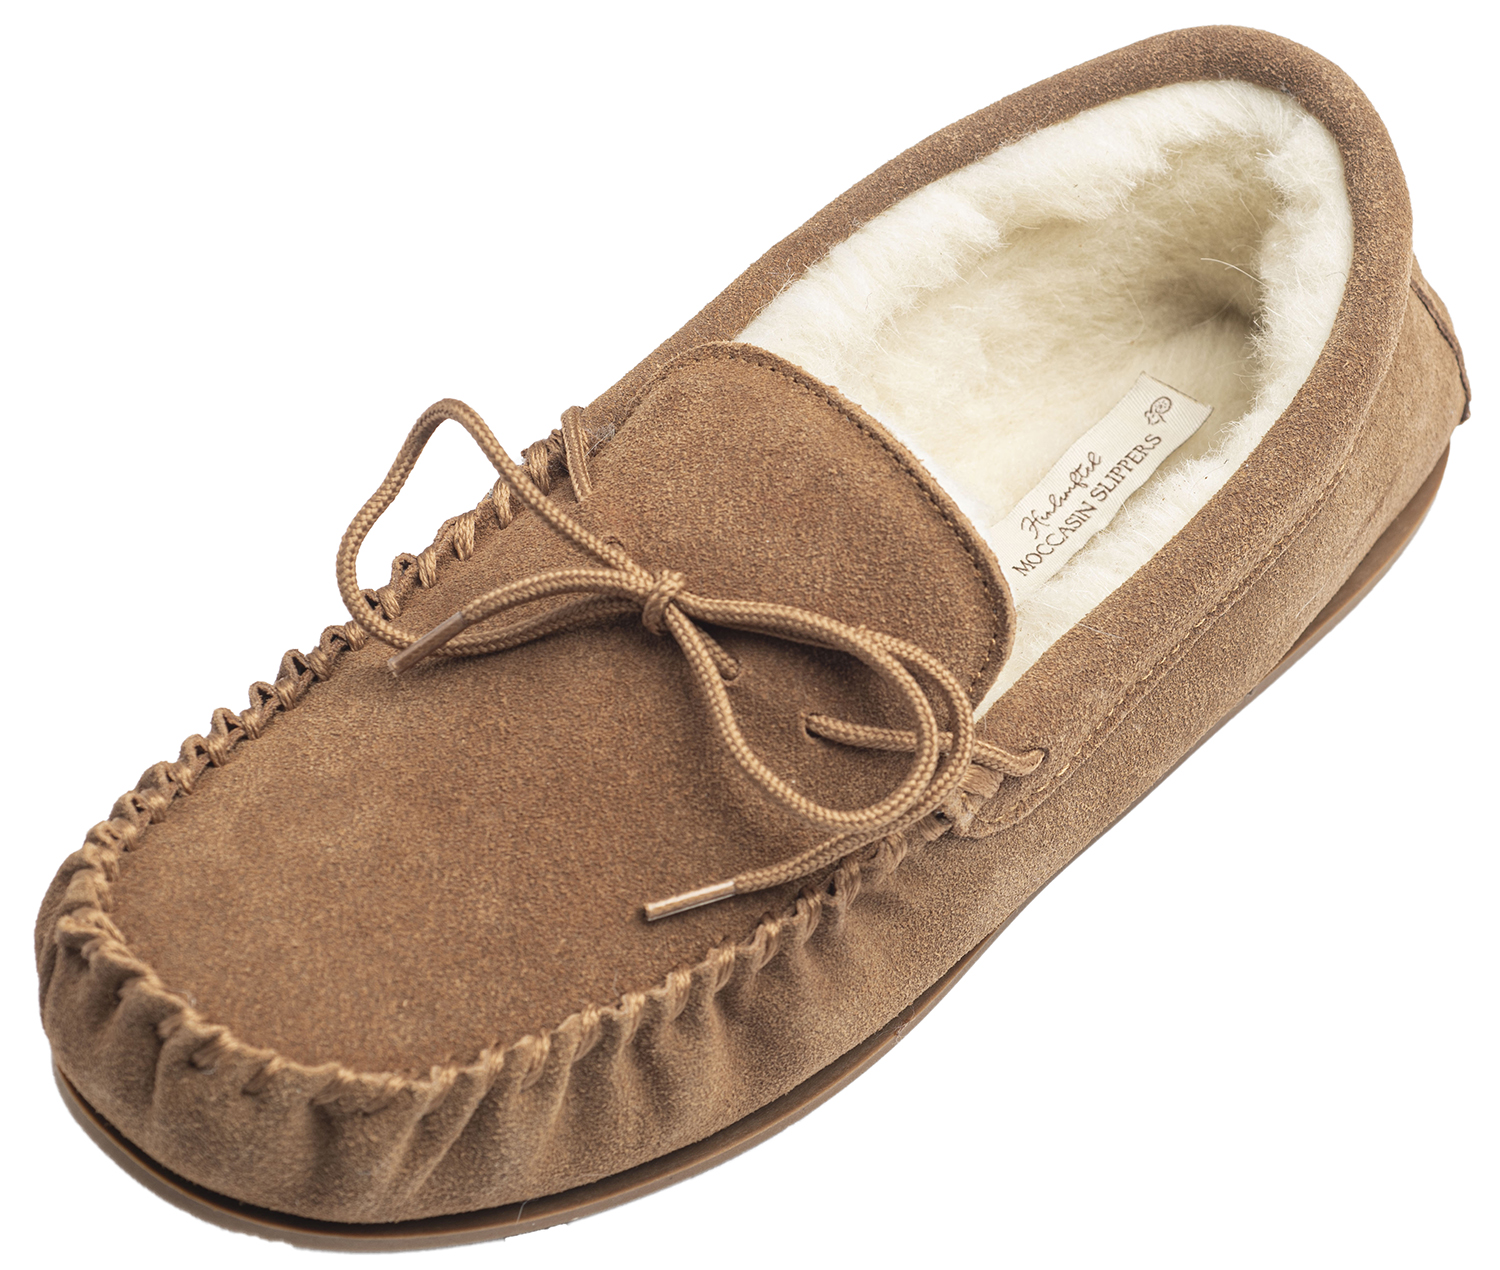 Dicks boys slippers or moccasins